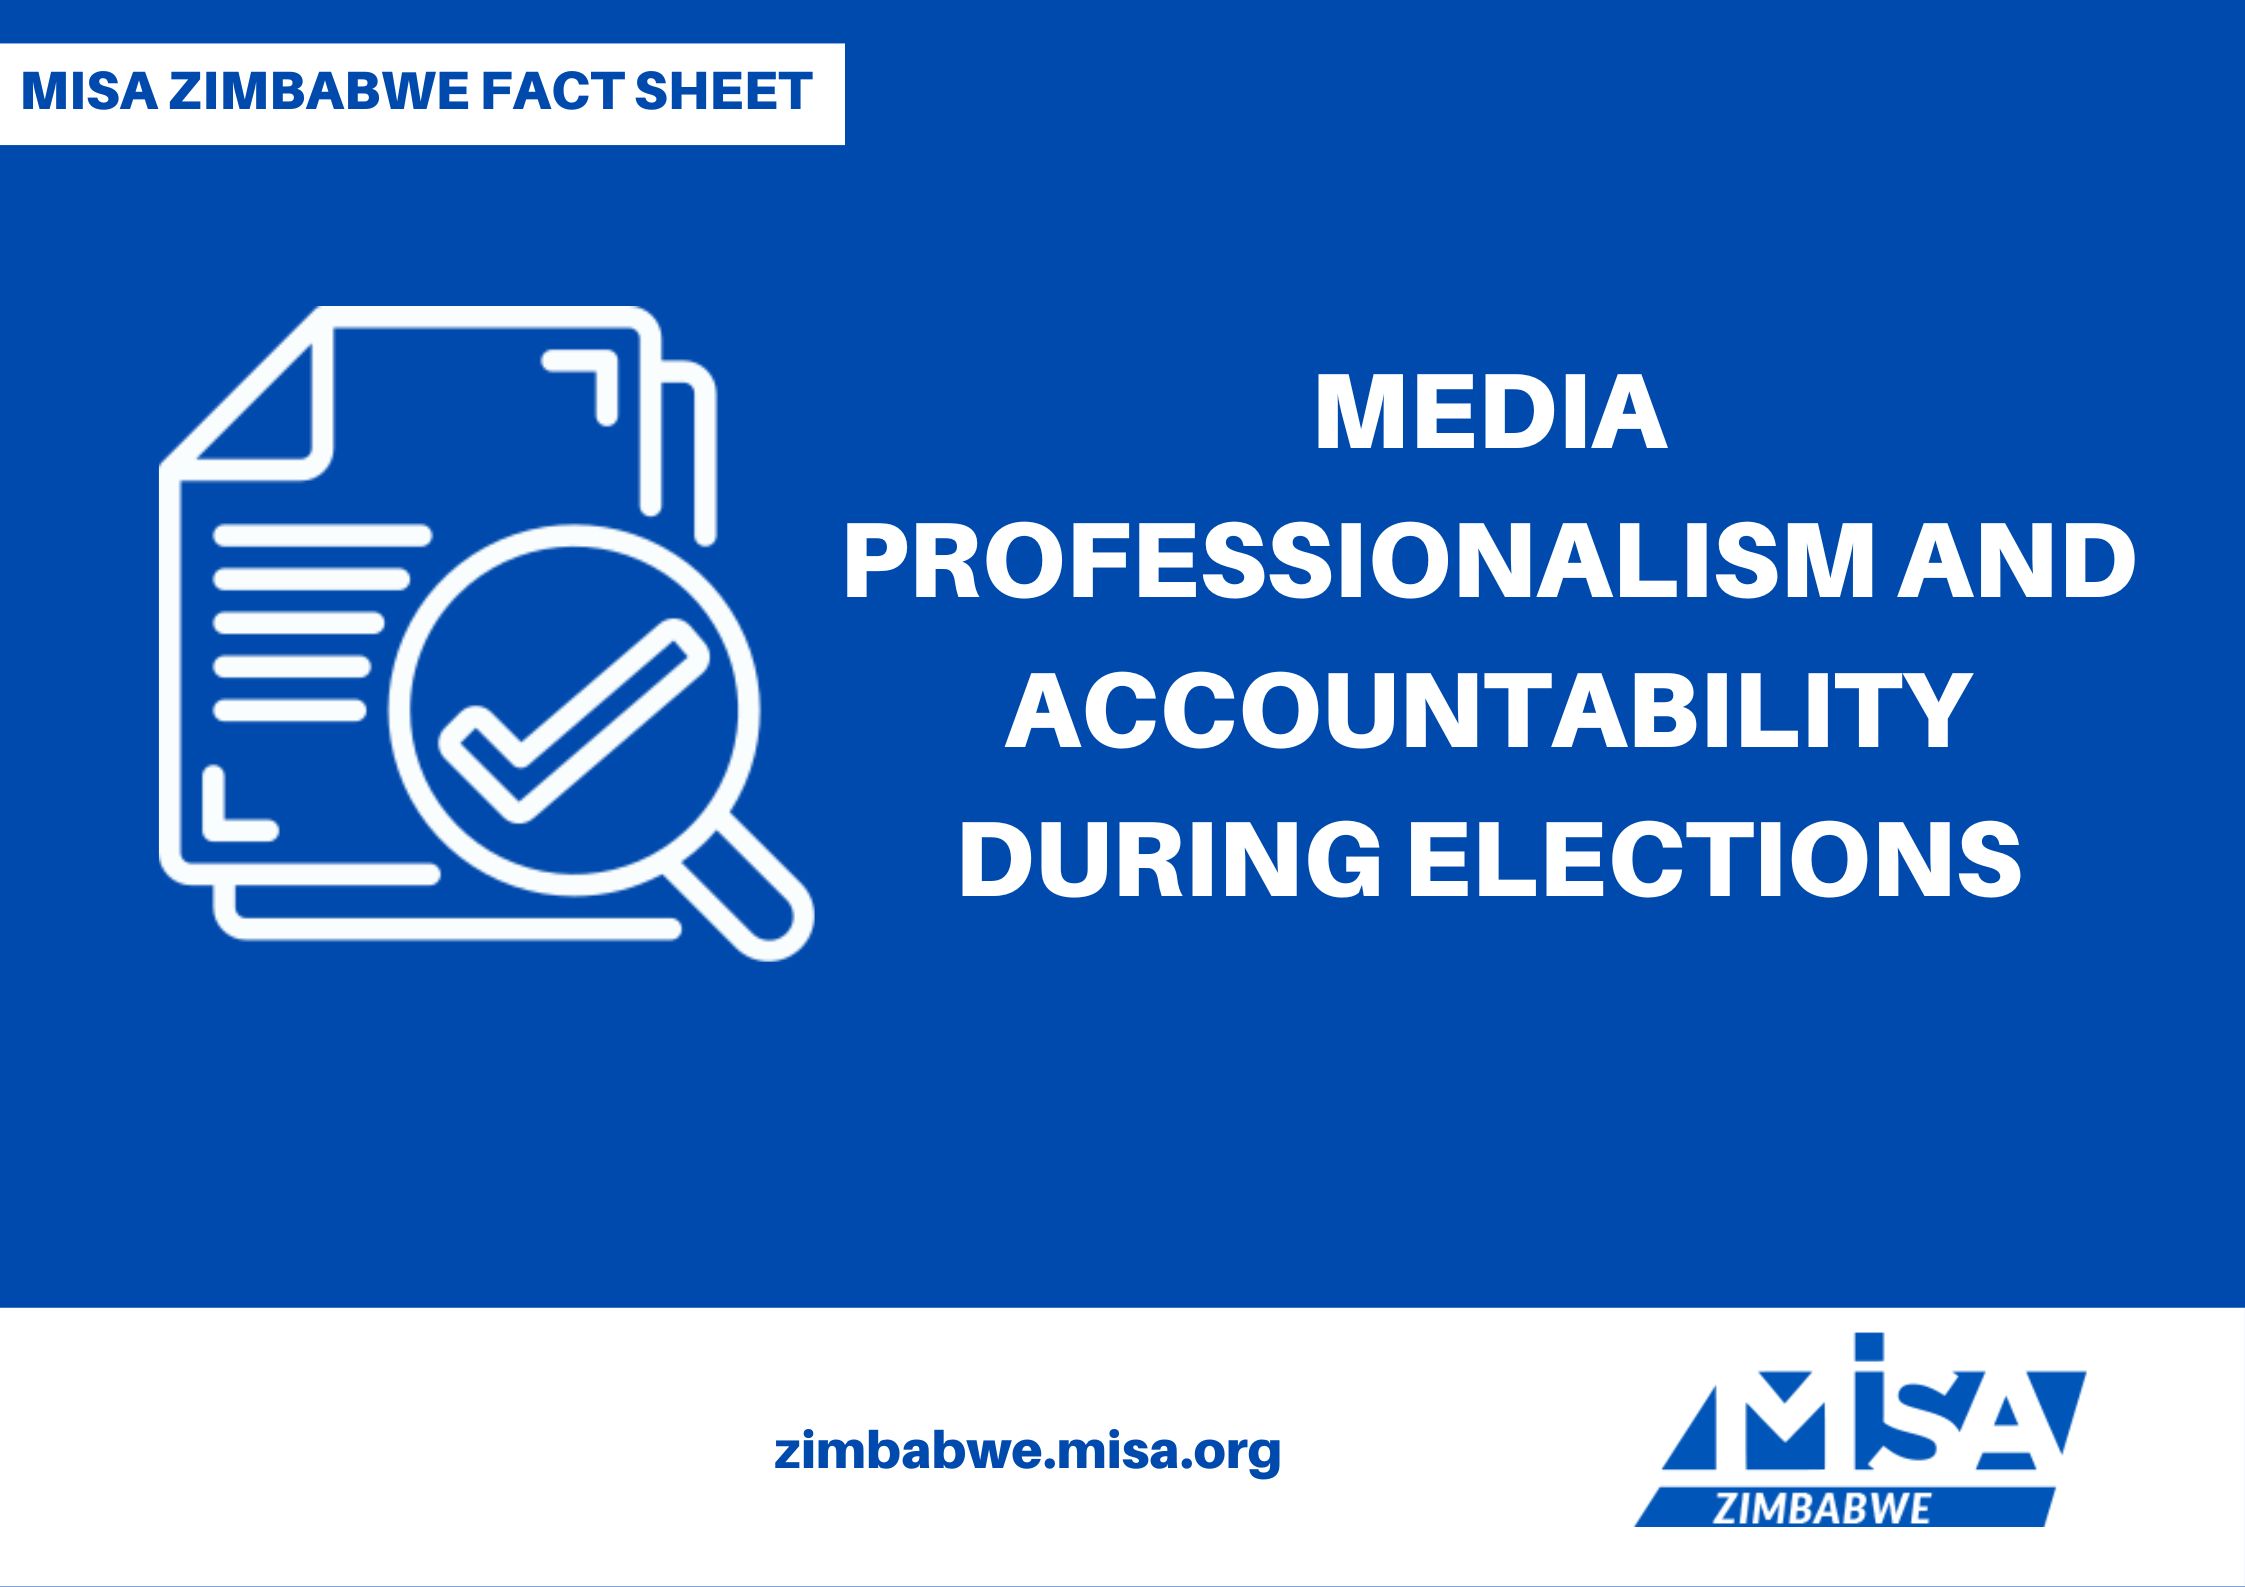 MEDIA PROFESSIONALISM AND ACCOUNTABILITY DURING ELECTIONS